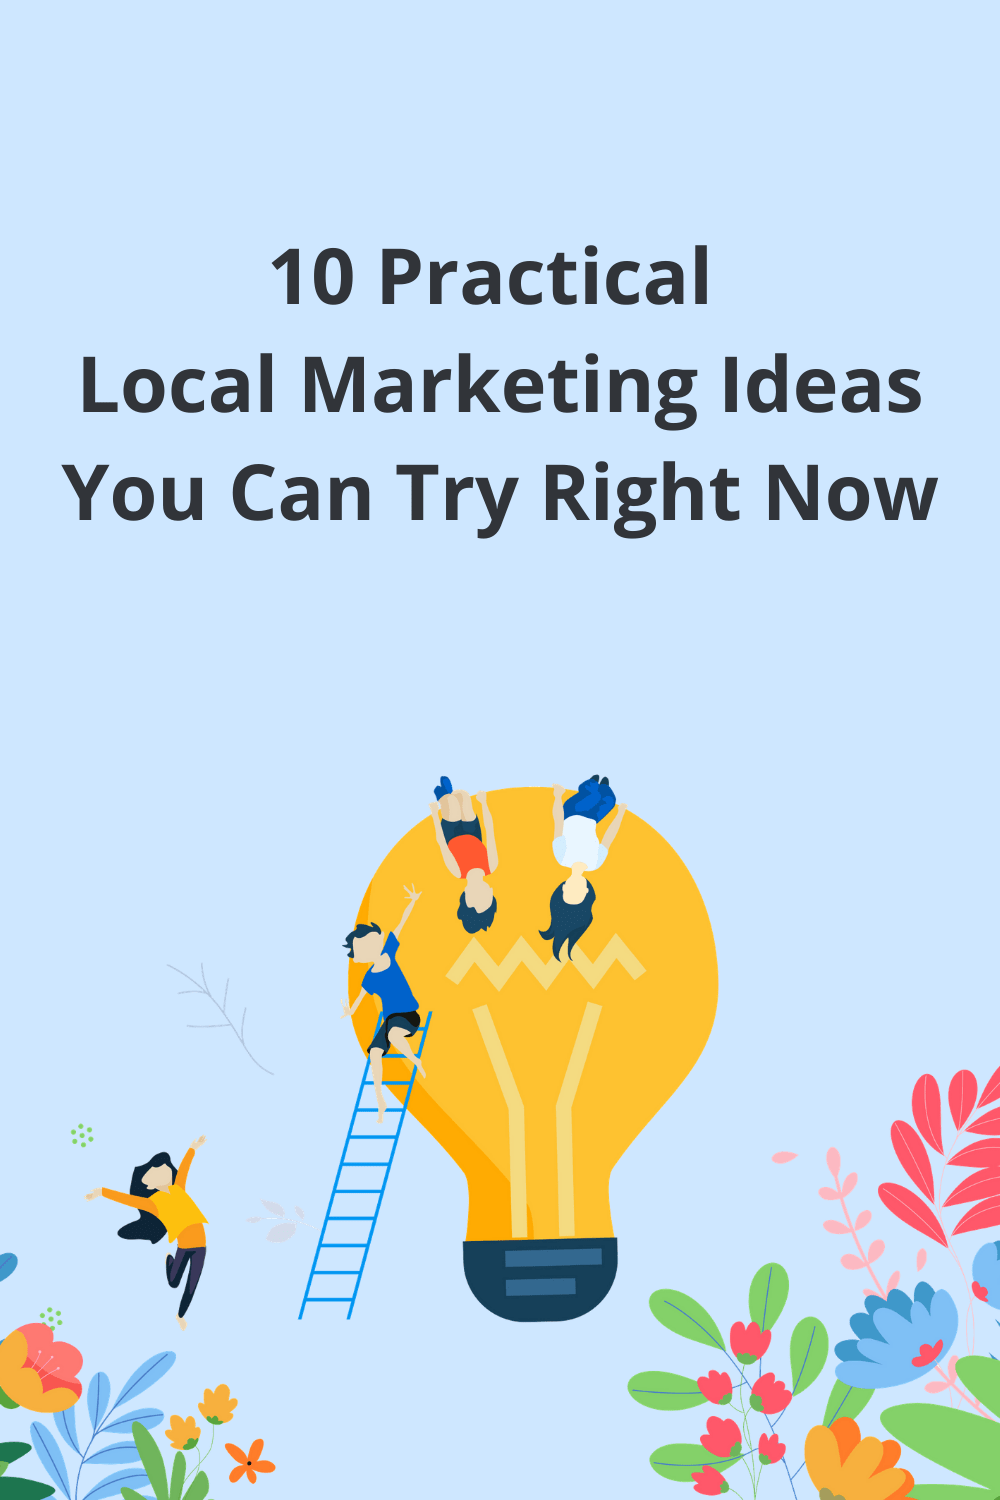 Local marketing doesn’t need to be expensive. These idea will help you make the most of your local marketing budget and grow your business. via @scopedesign